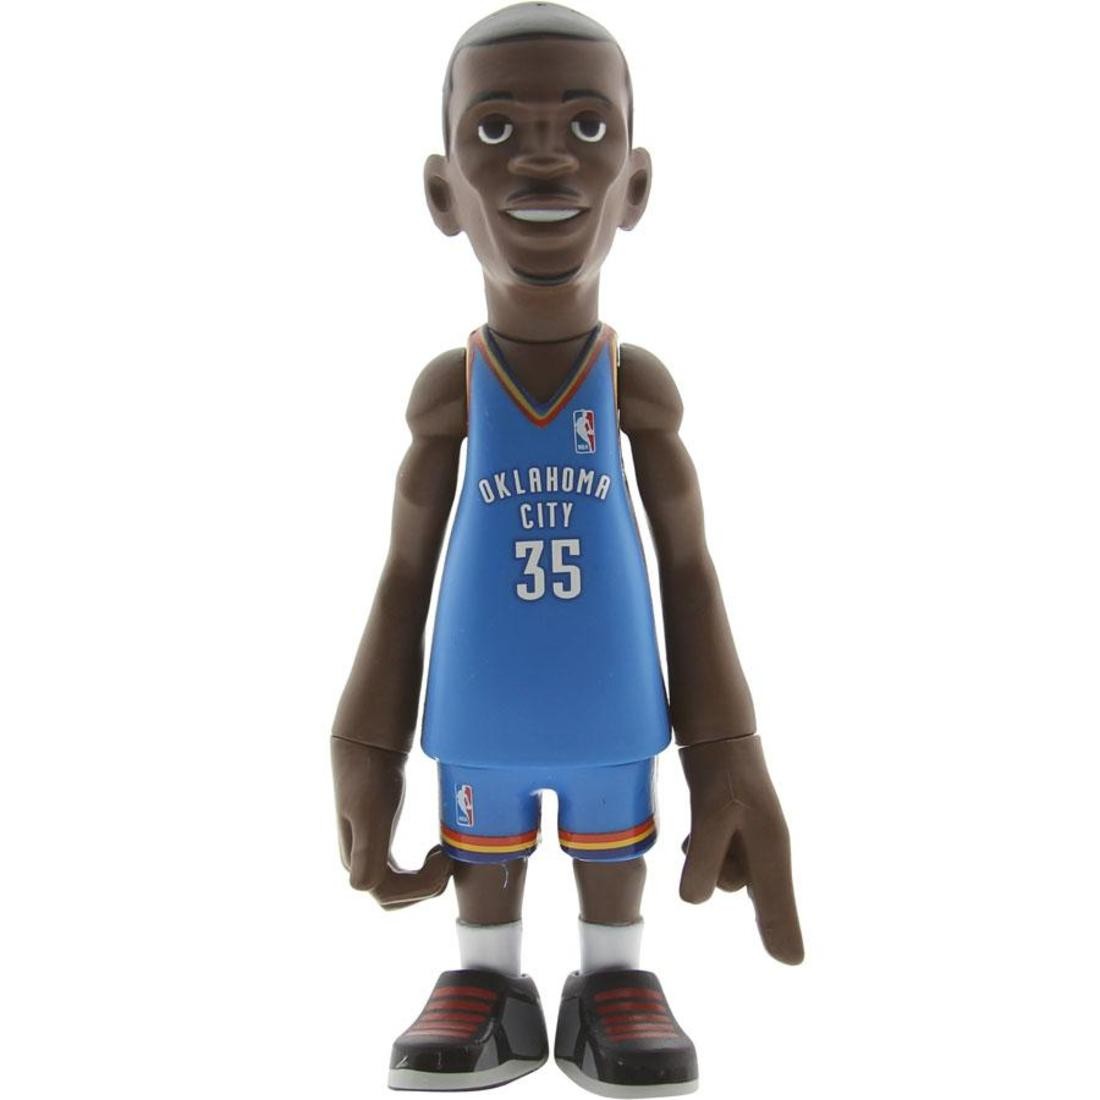 MINDstyle x CoolRain Kevin Durant NBA Collector Series 2 Figure (blue)